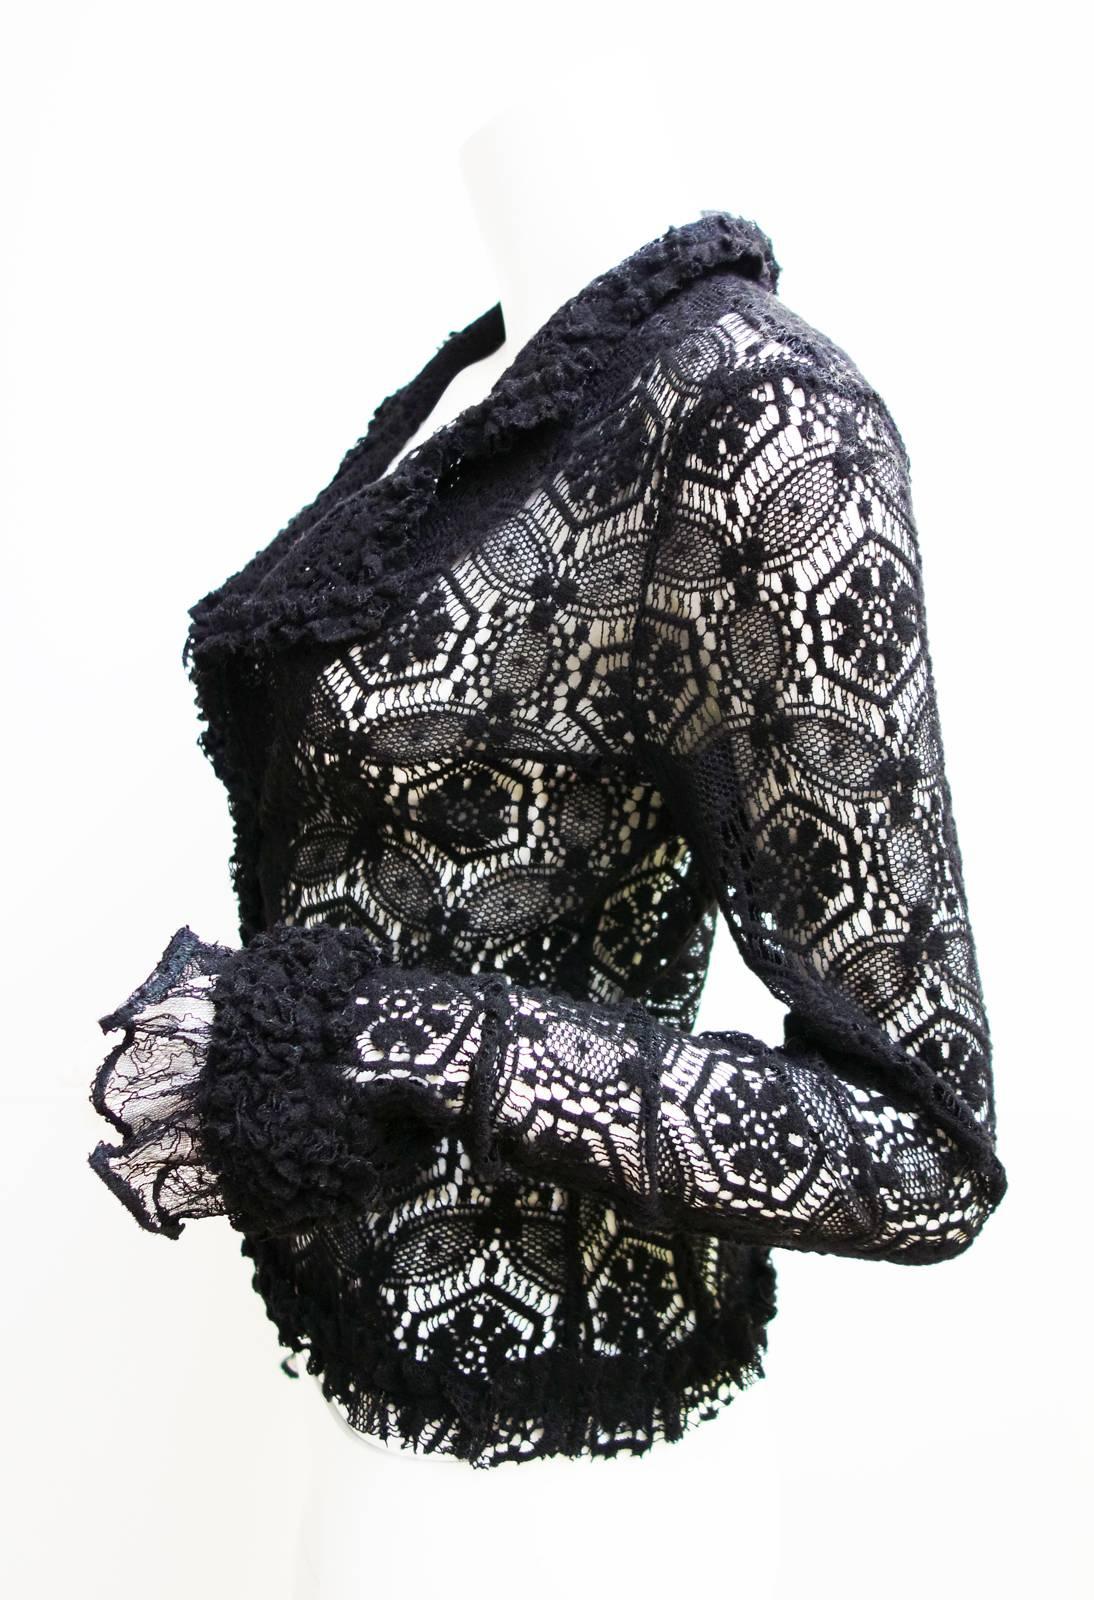 Black lace crochet Chanel cardigan with ruffle trim and hook and eye closure at front. 
Gorgeous piece to wear all year around, dressy or casual.
Size: 38 Made in Italy
Style# P24766W03444
Composition: 80% Wool, 20% Nylon